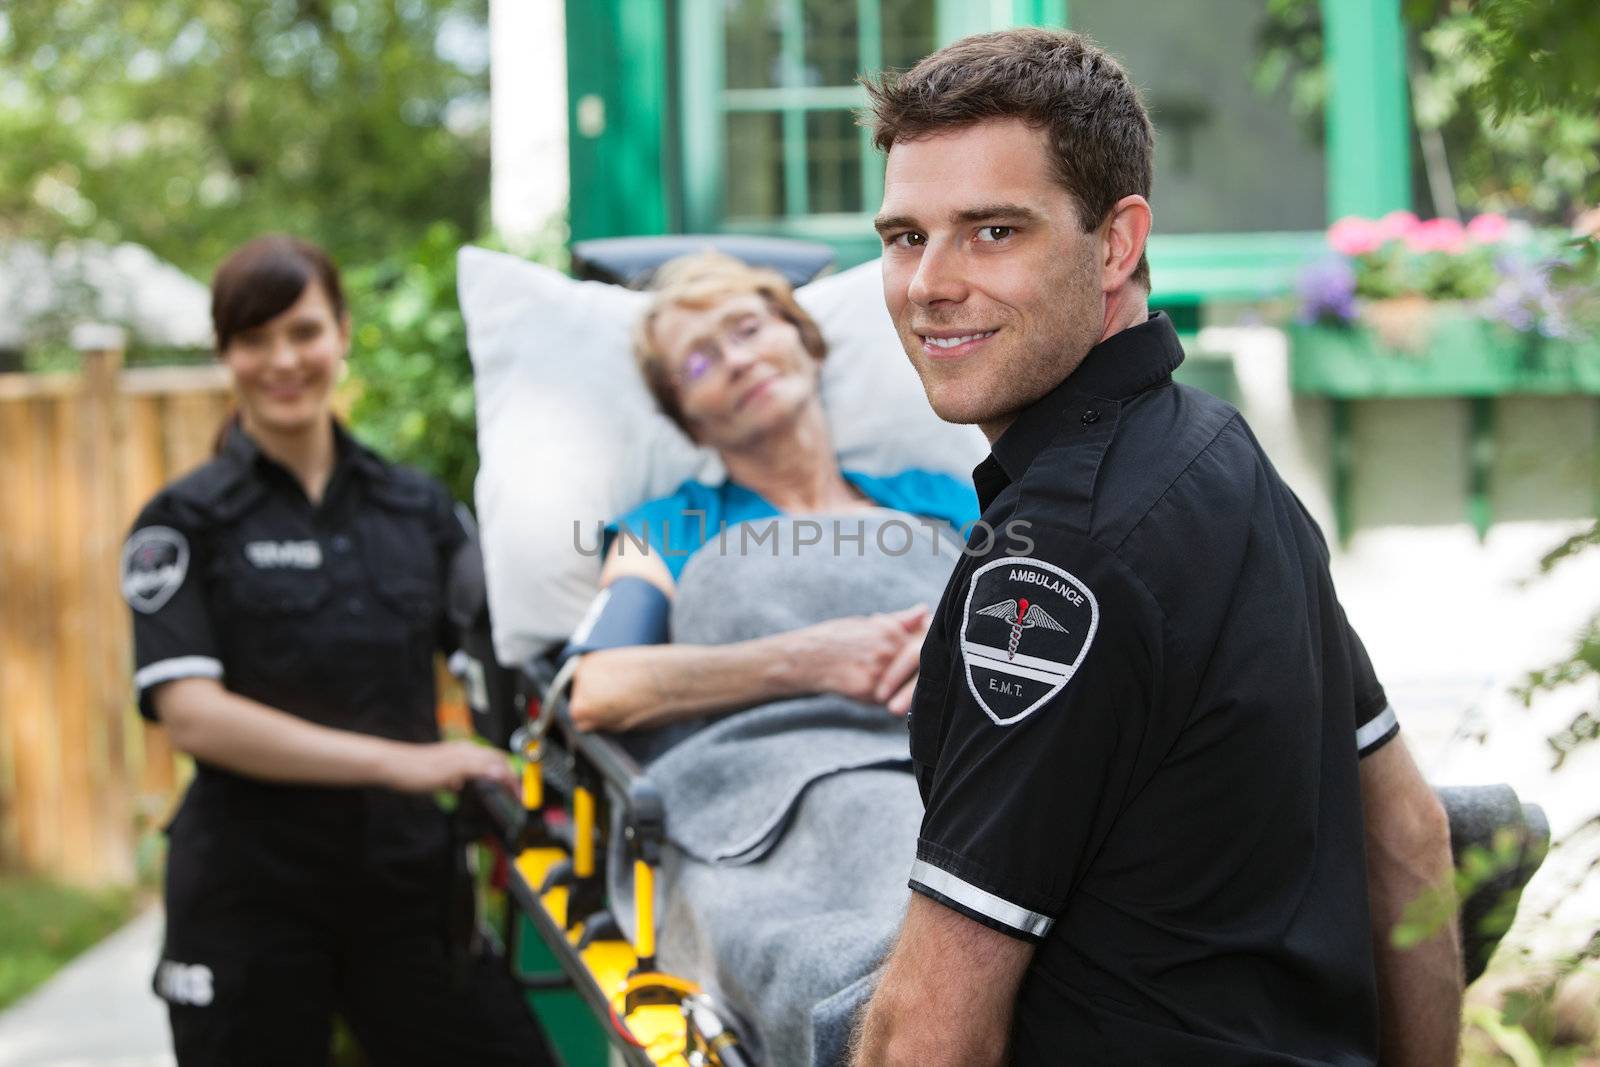 Ambulance Worker with Patient by leaf